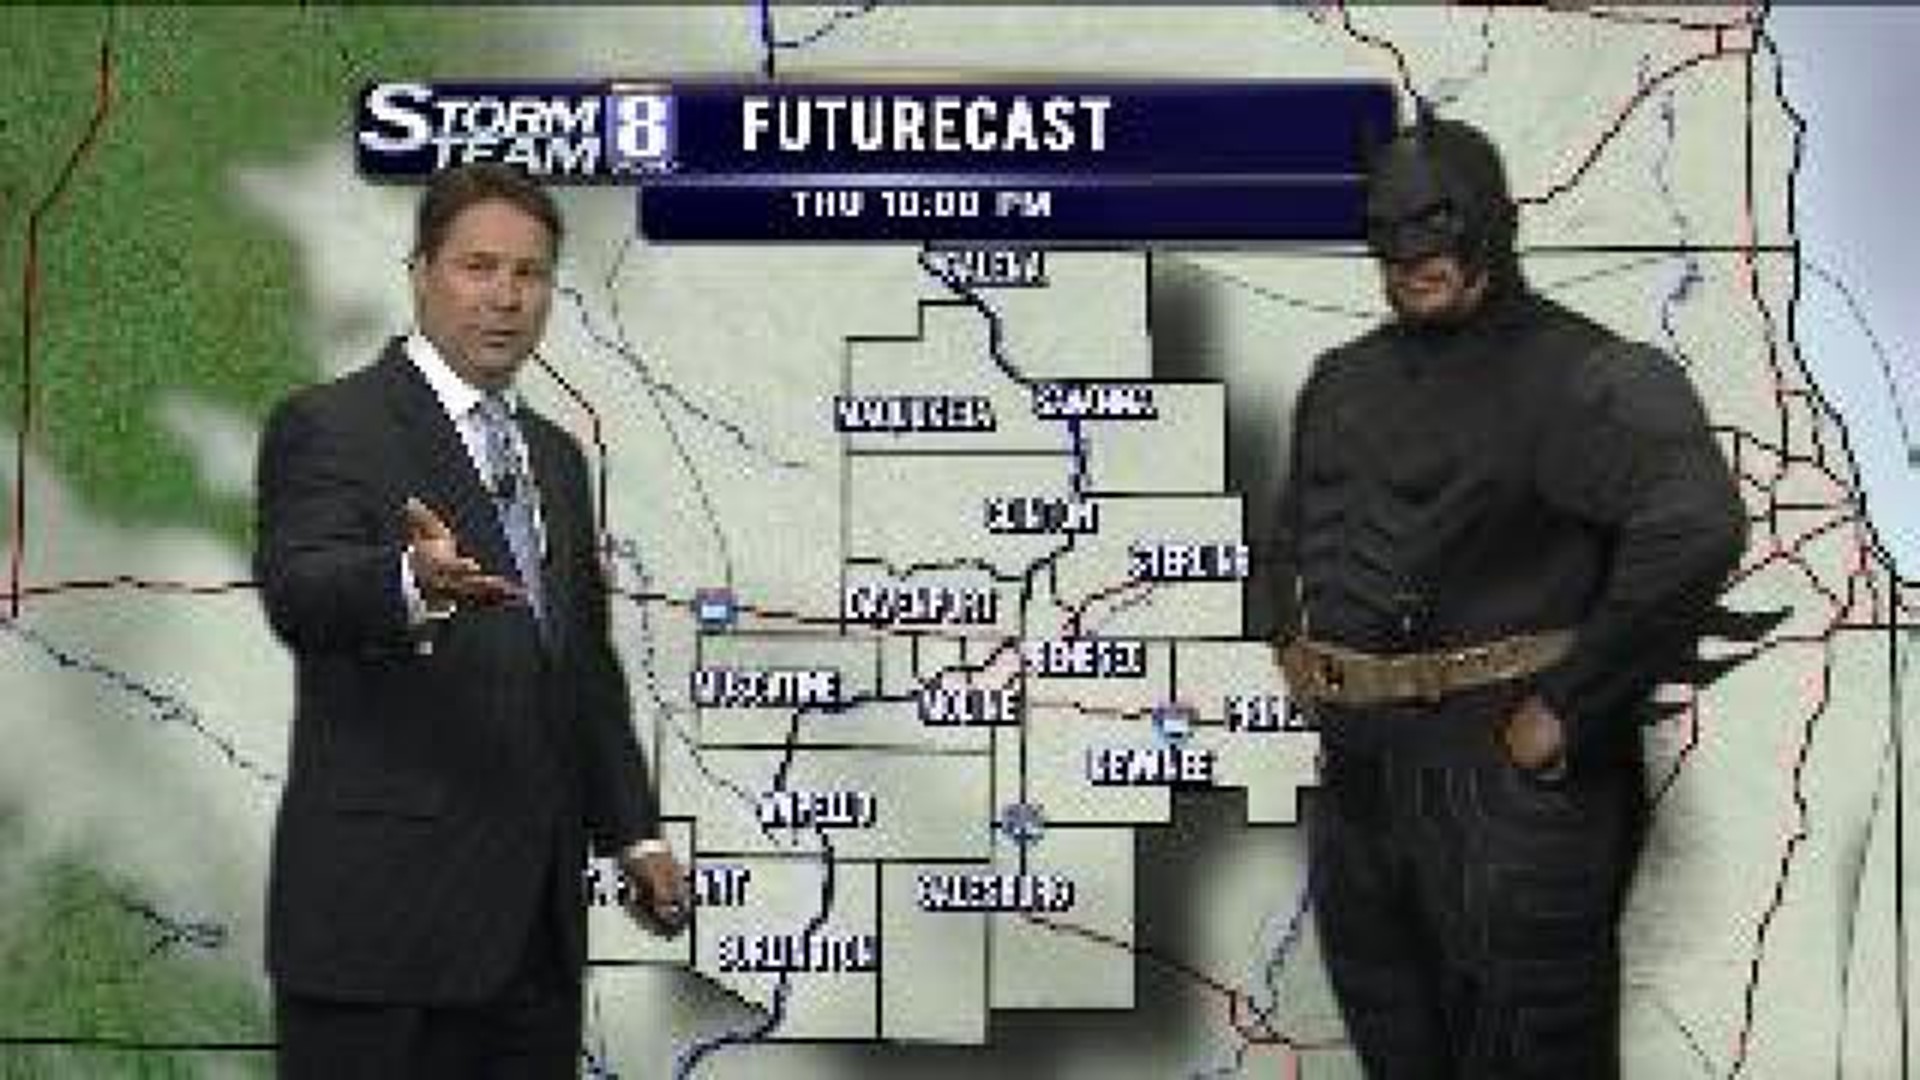 Batman does the weather